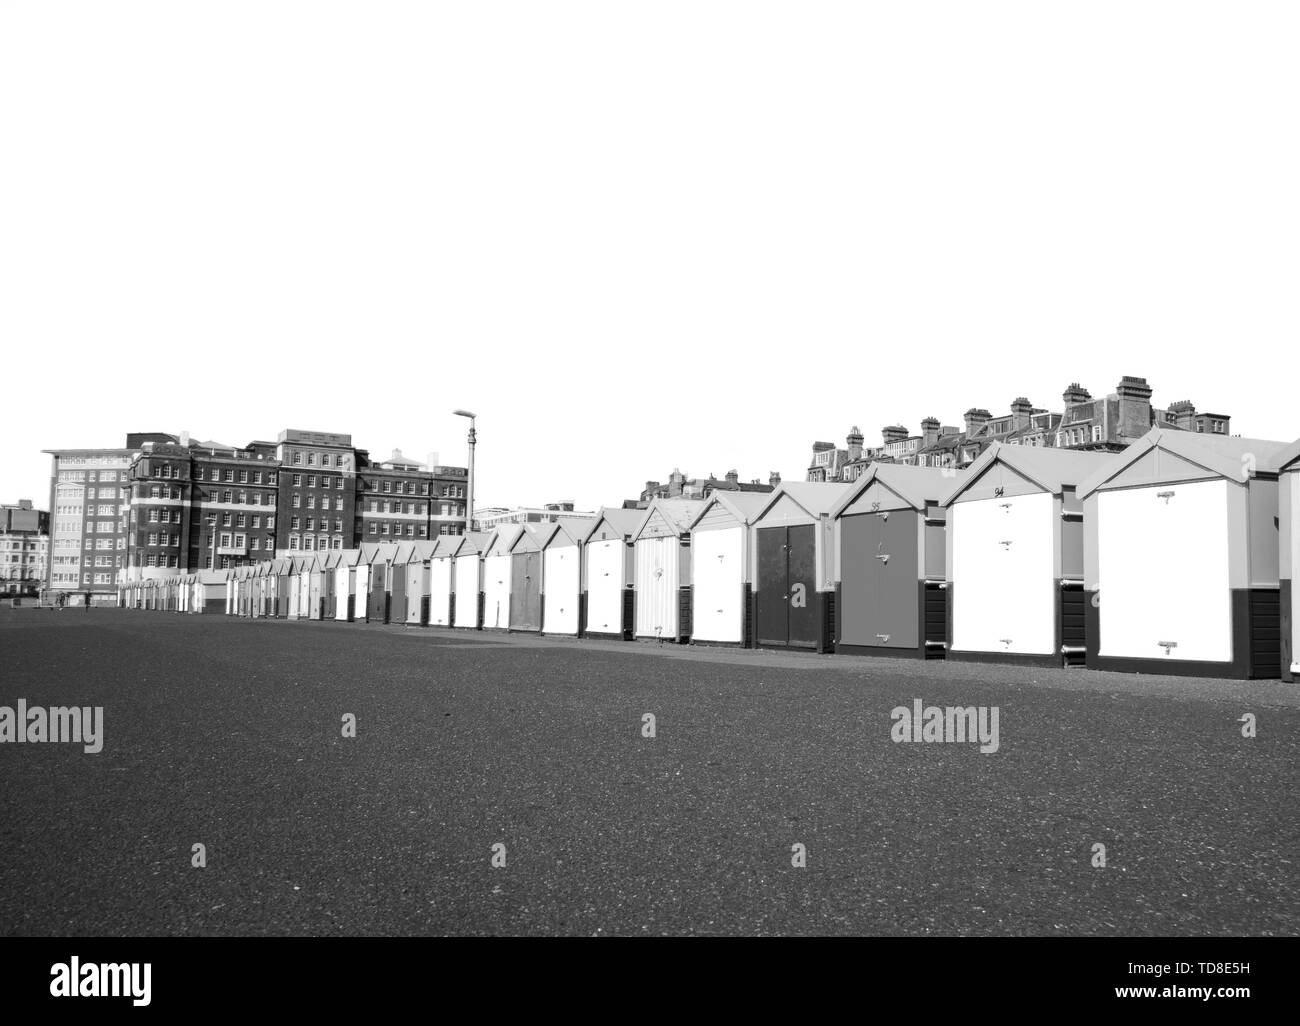 Black-white landscape photography with a row of beach huts of Hove, Brighton, UK. High contrast. Stock Photo